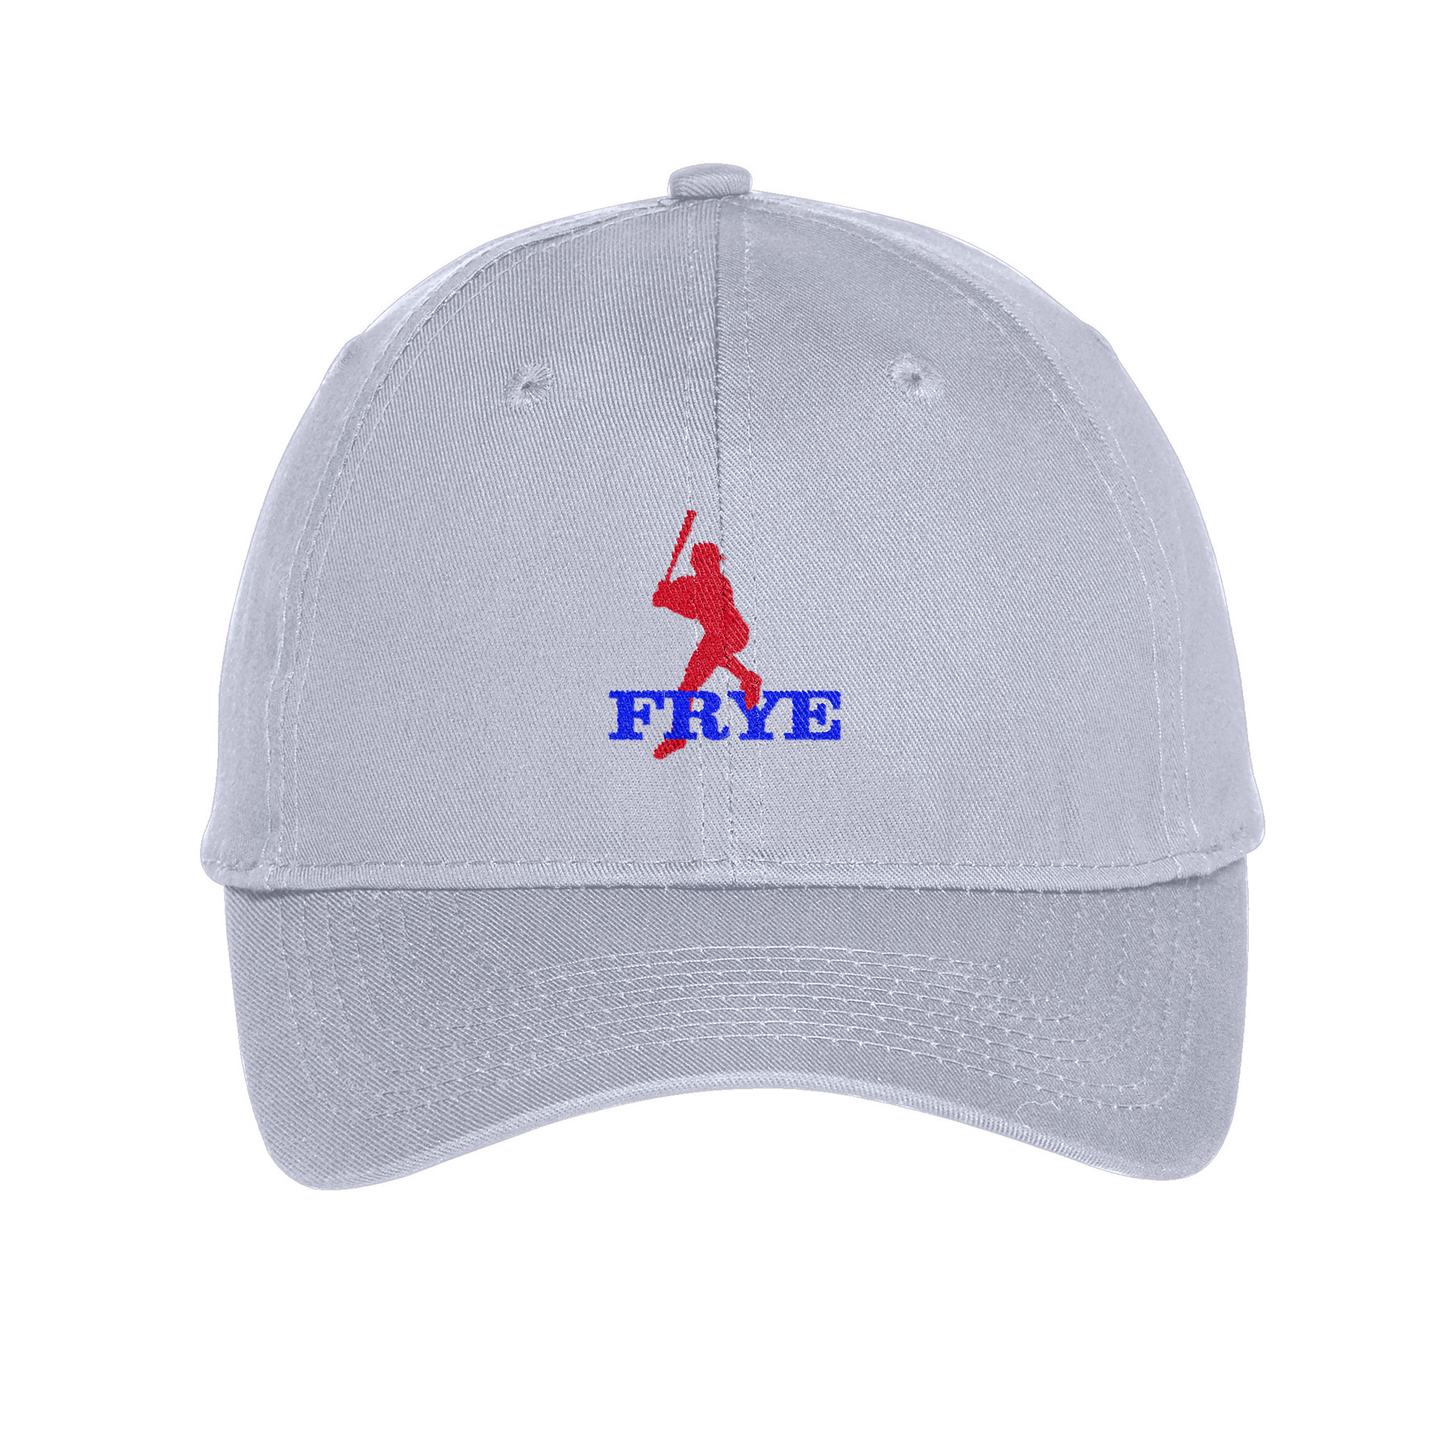 GT Frye Embroidered Twill Cap